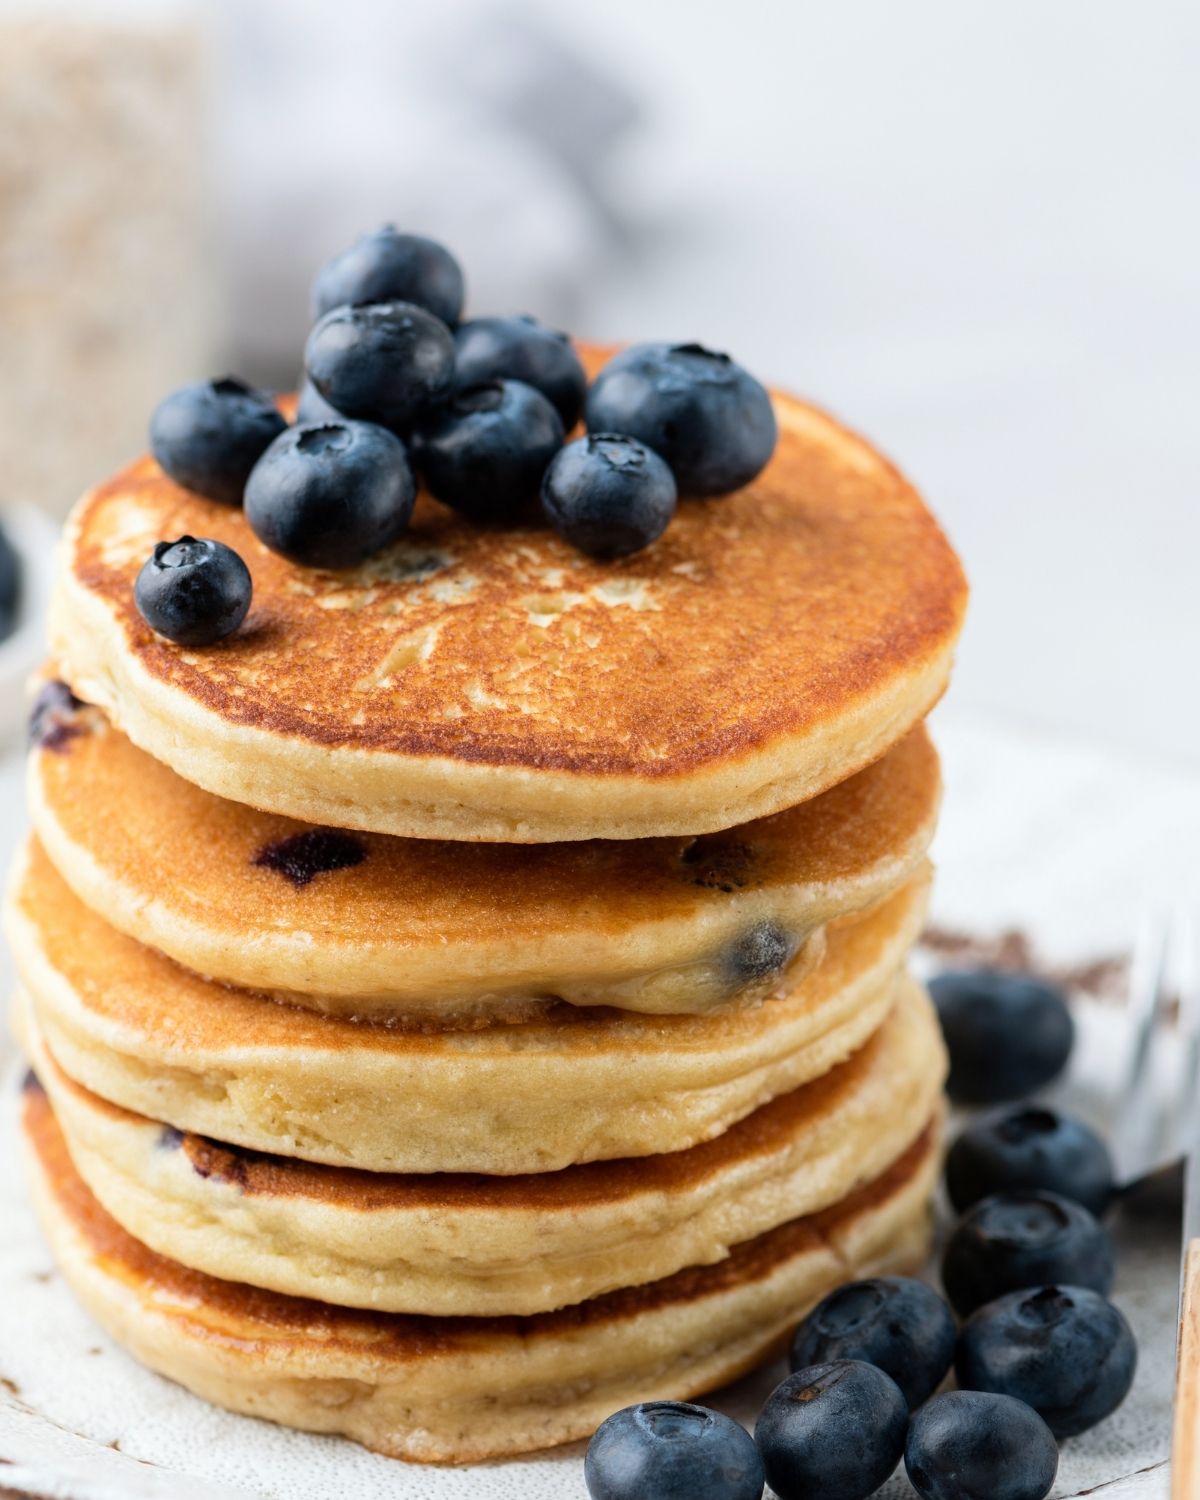 A side view of the pancakes. Surrounded by blueberries.